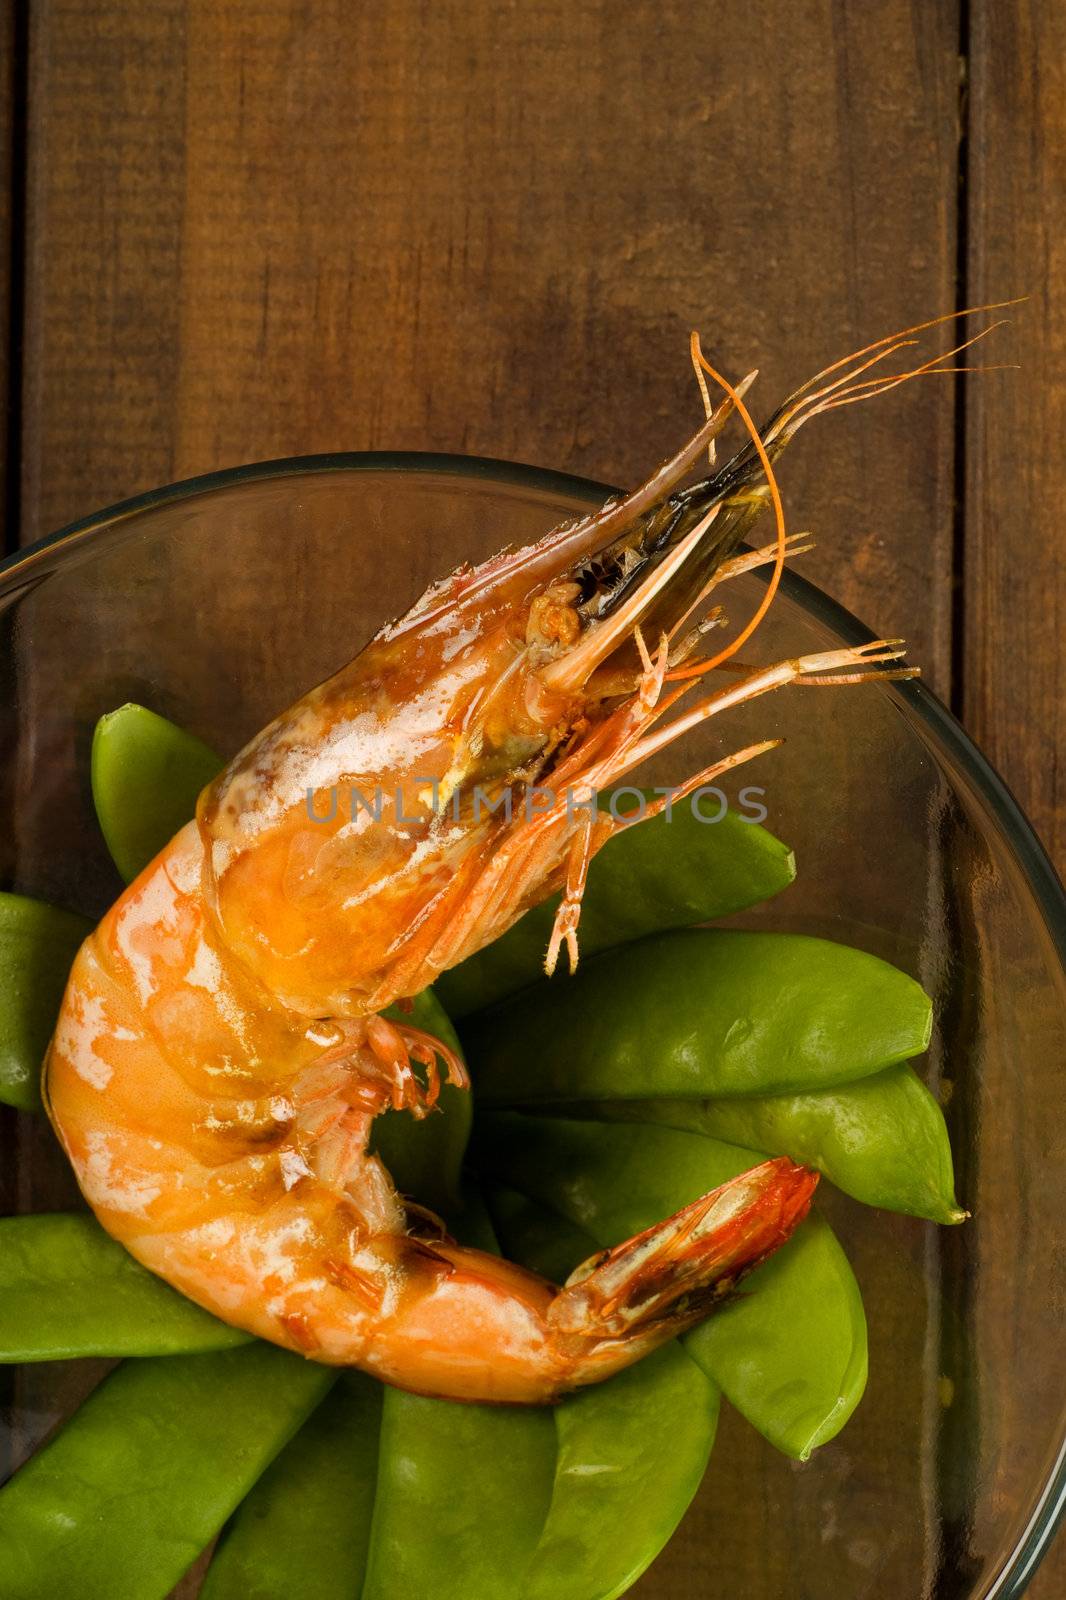 Cooked prawn on bed of green peas or beans